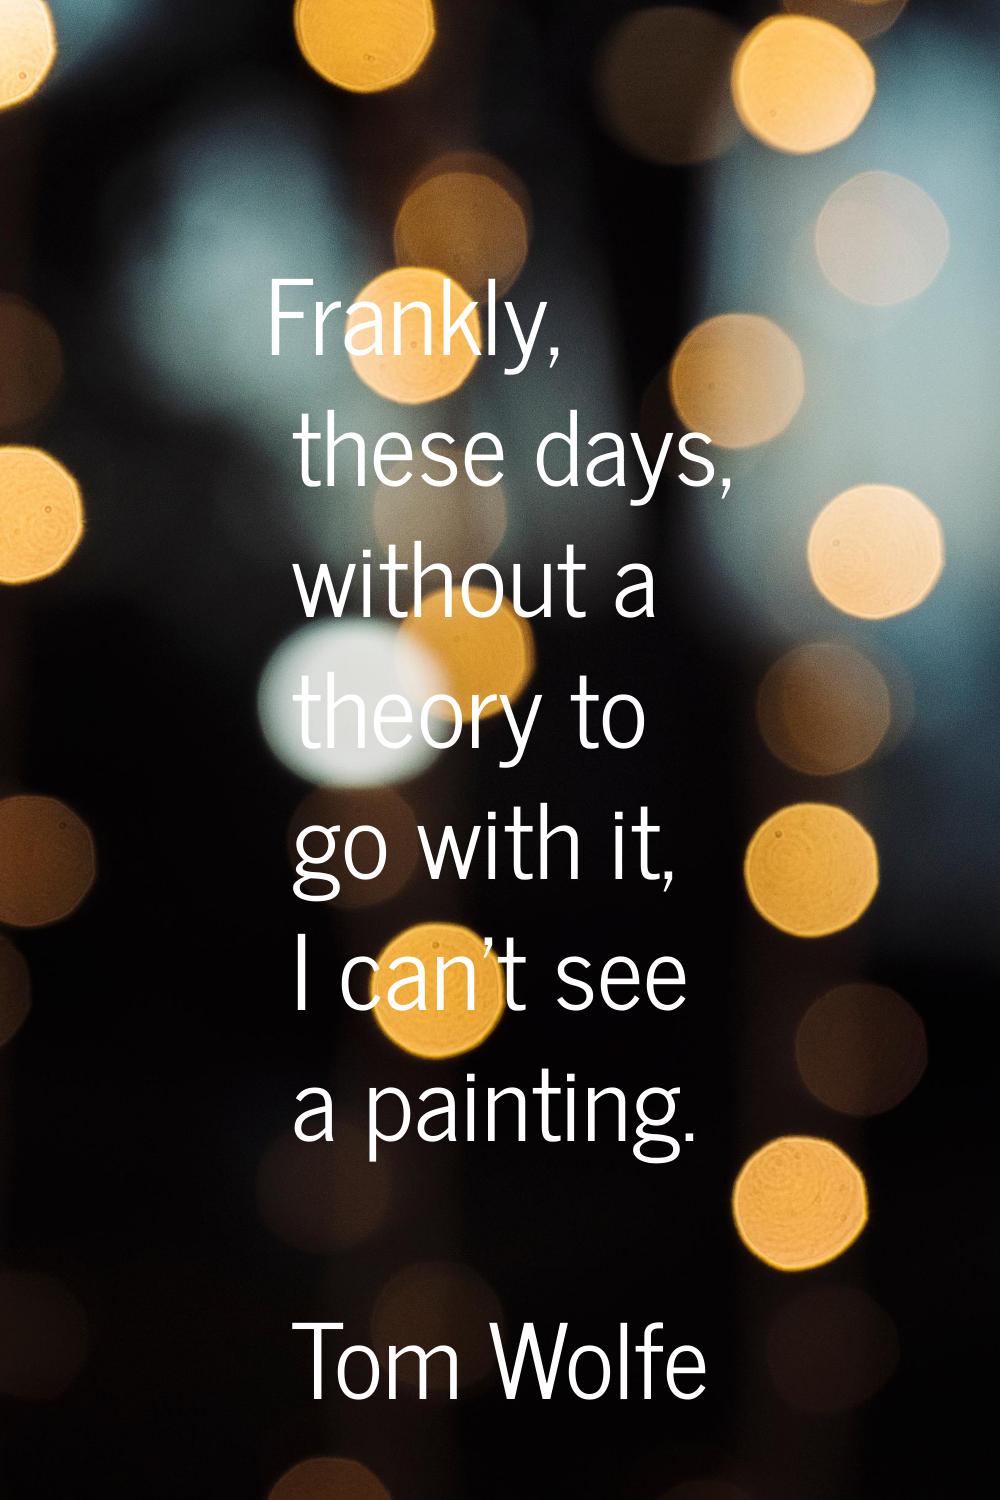 Frankly, these days, without a theory to go with it, I can't see a painting.